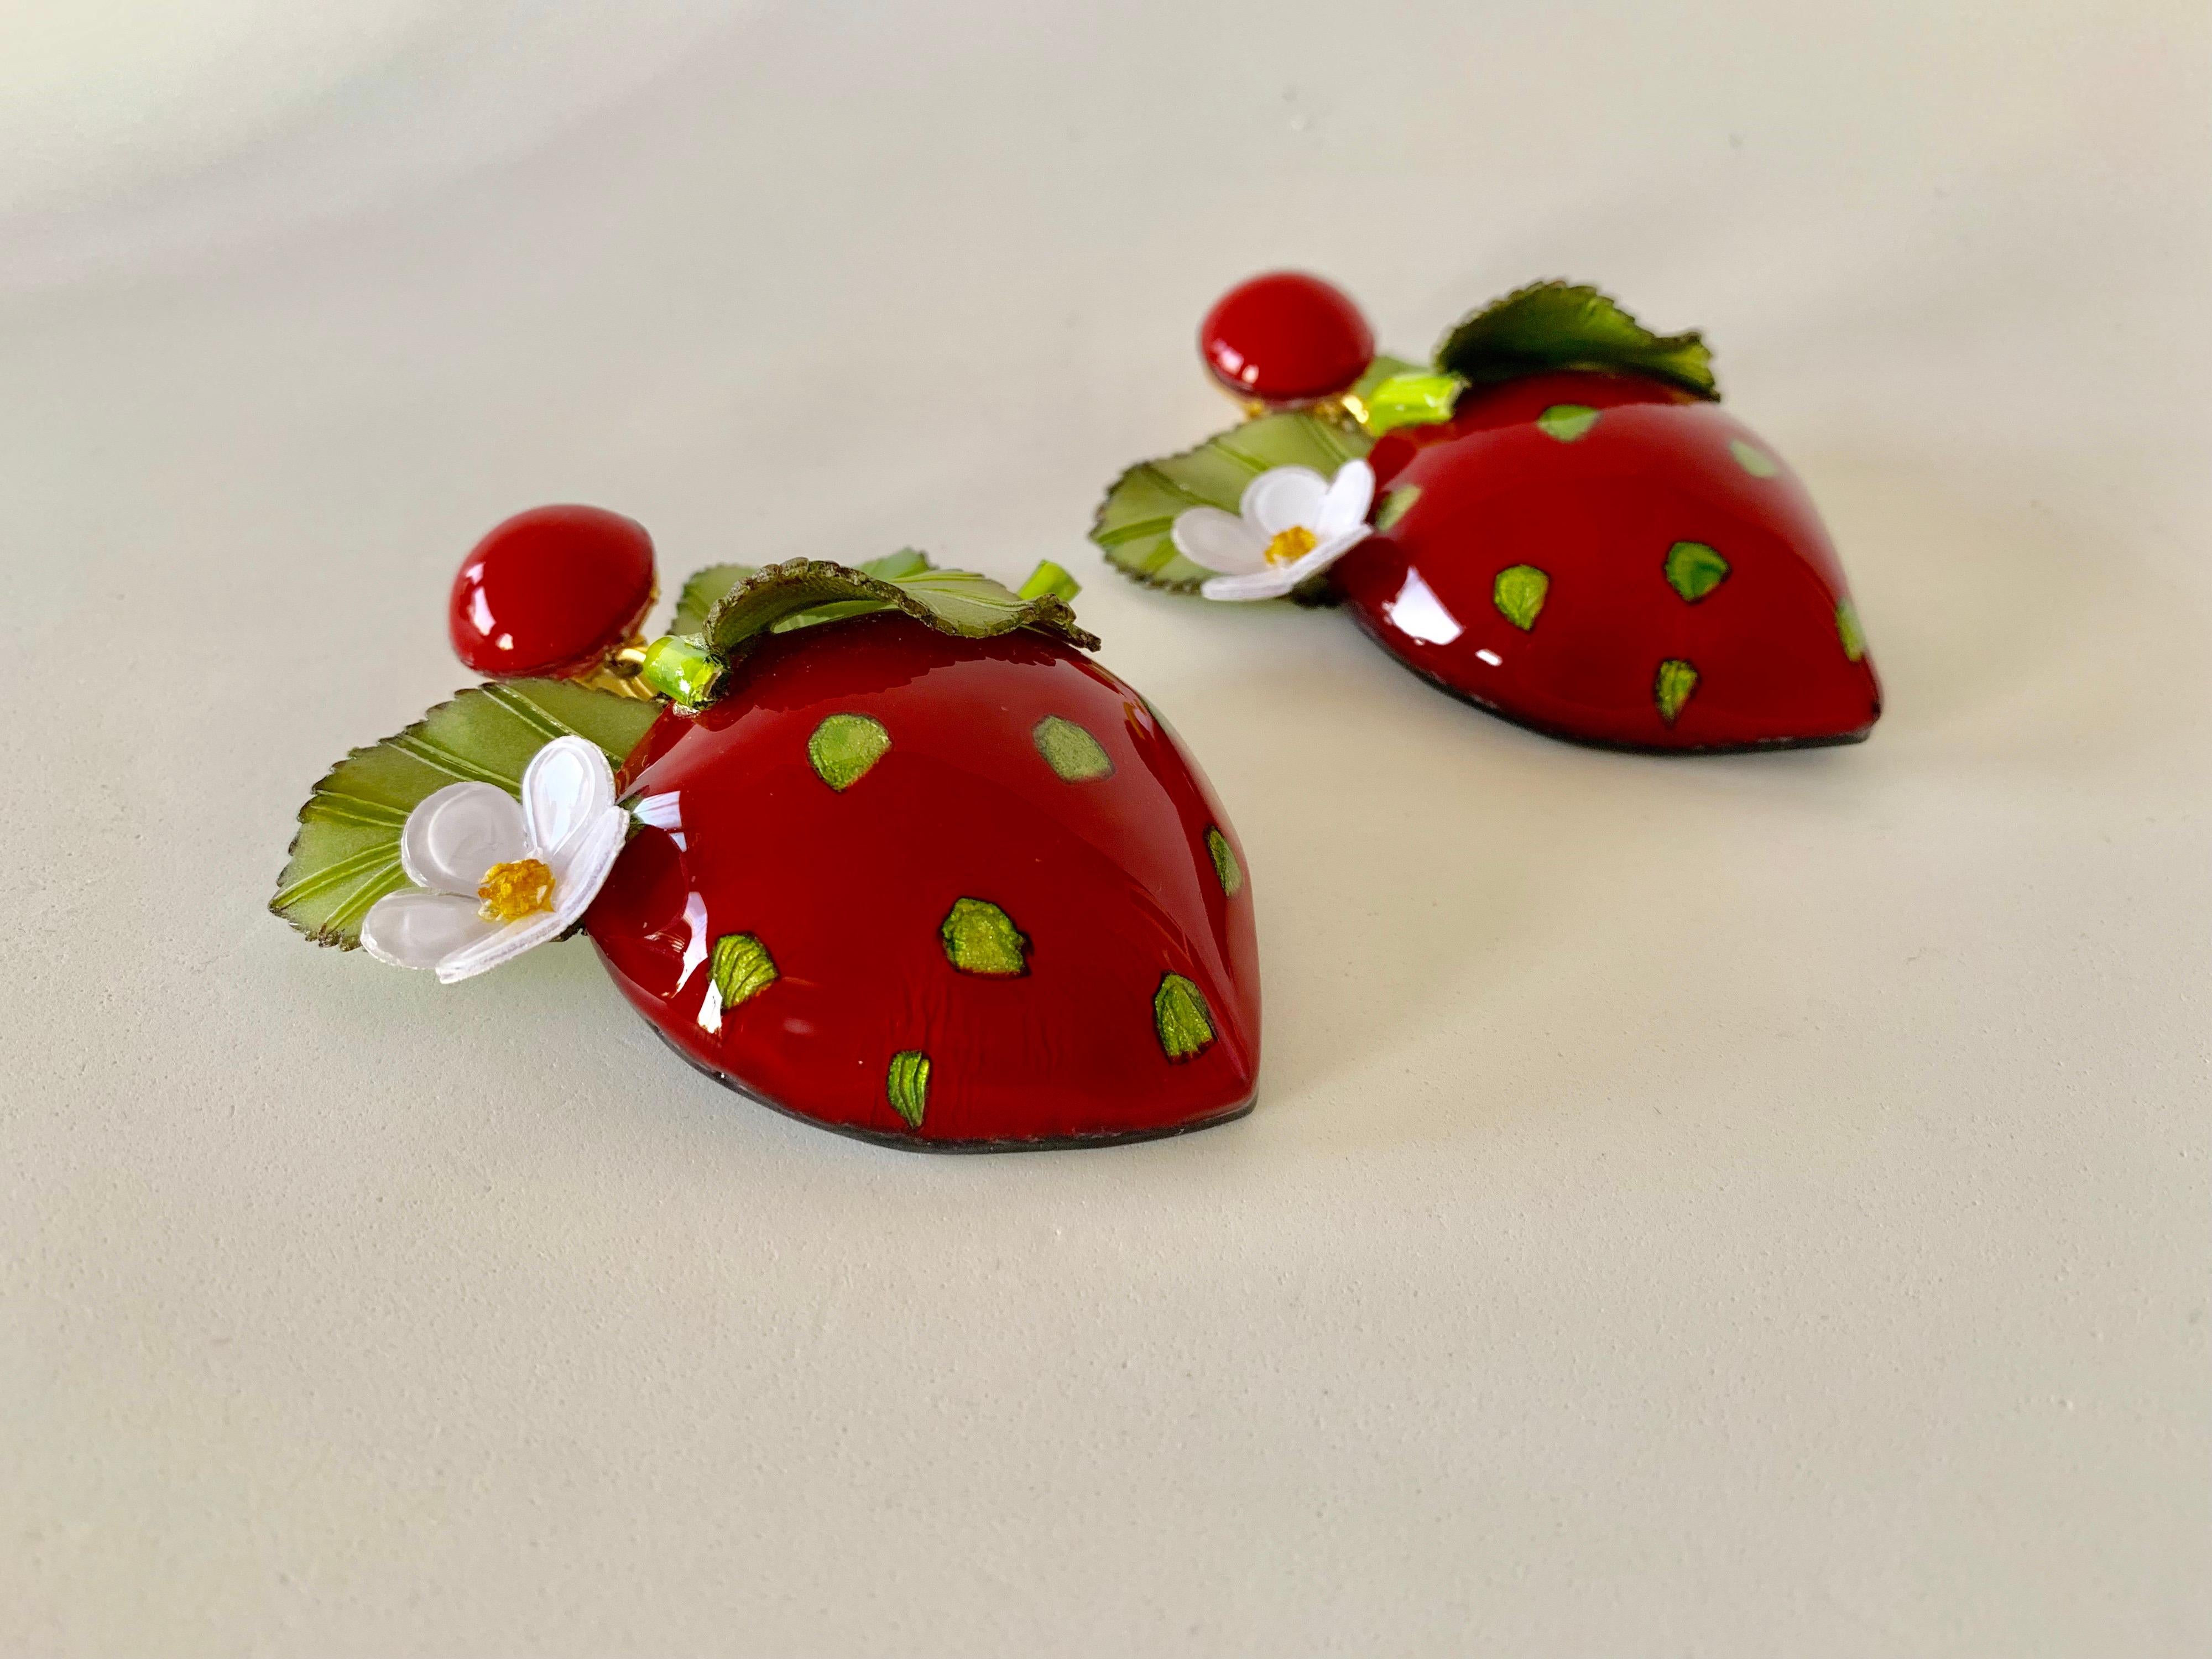 Light and easy to wear, these contemporary handmade artisanal contemporary clip-on earrings were made in Paris by Cilea. The lightweight statement earrings feature large detailed enameline (enamel and resin composite) strawberries. 

Each piece of